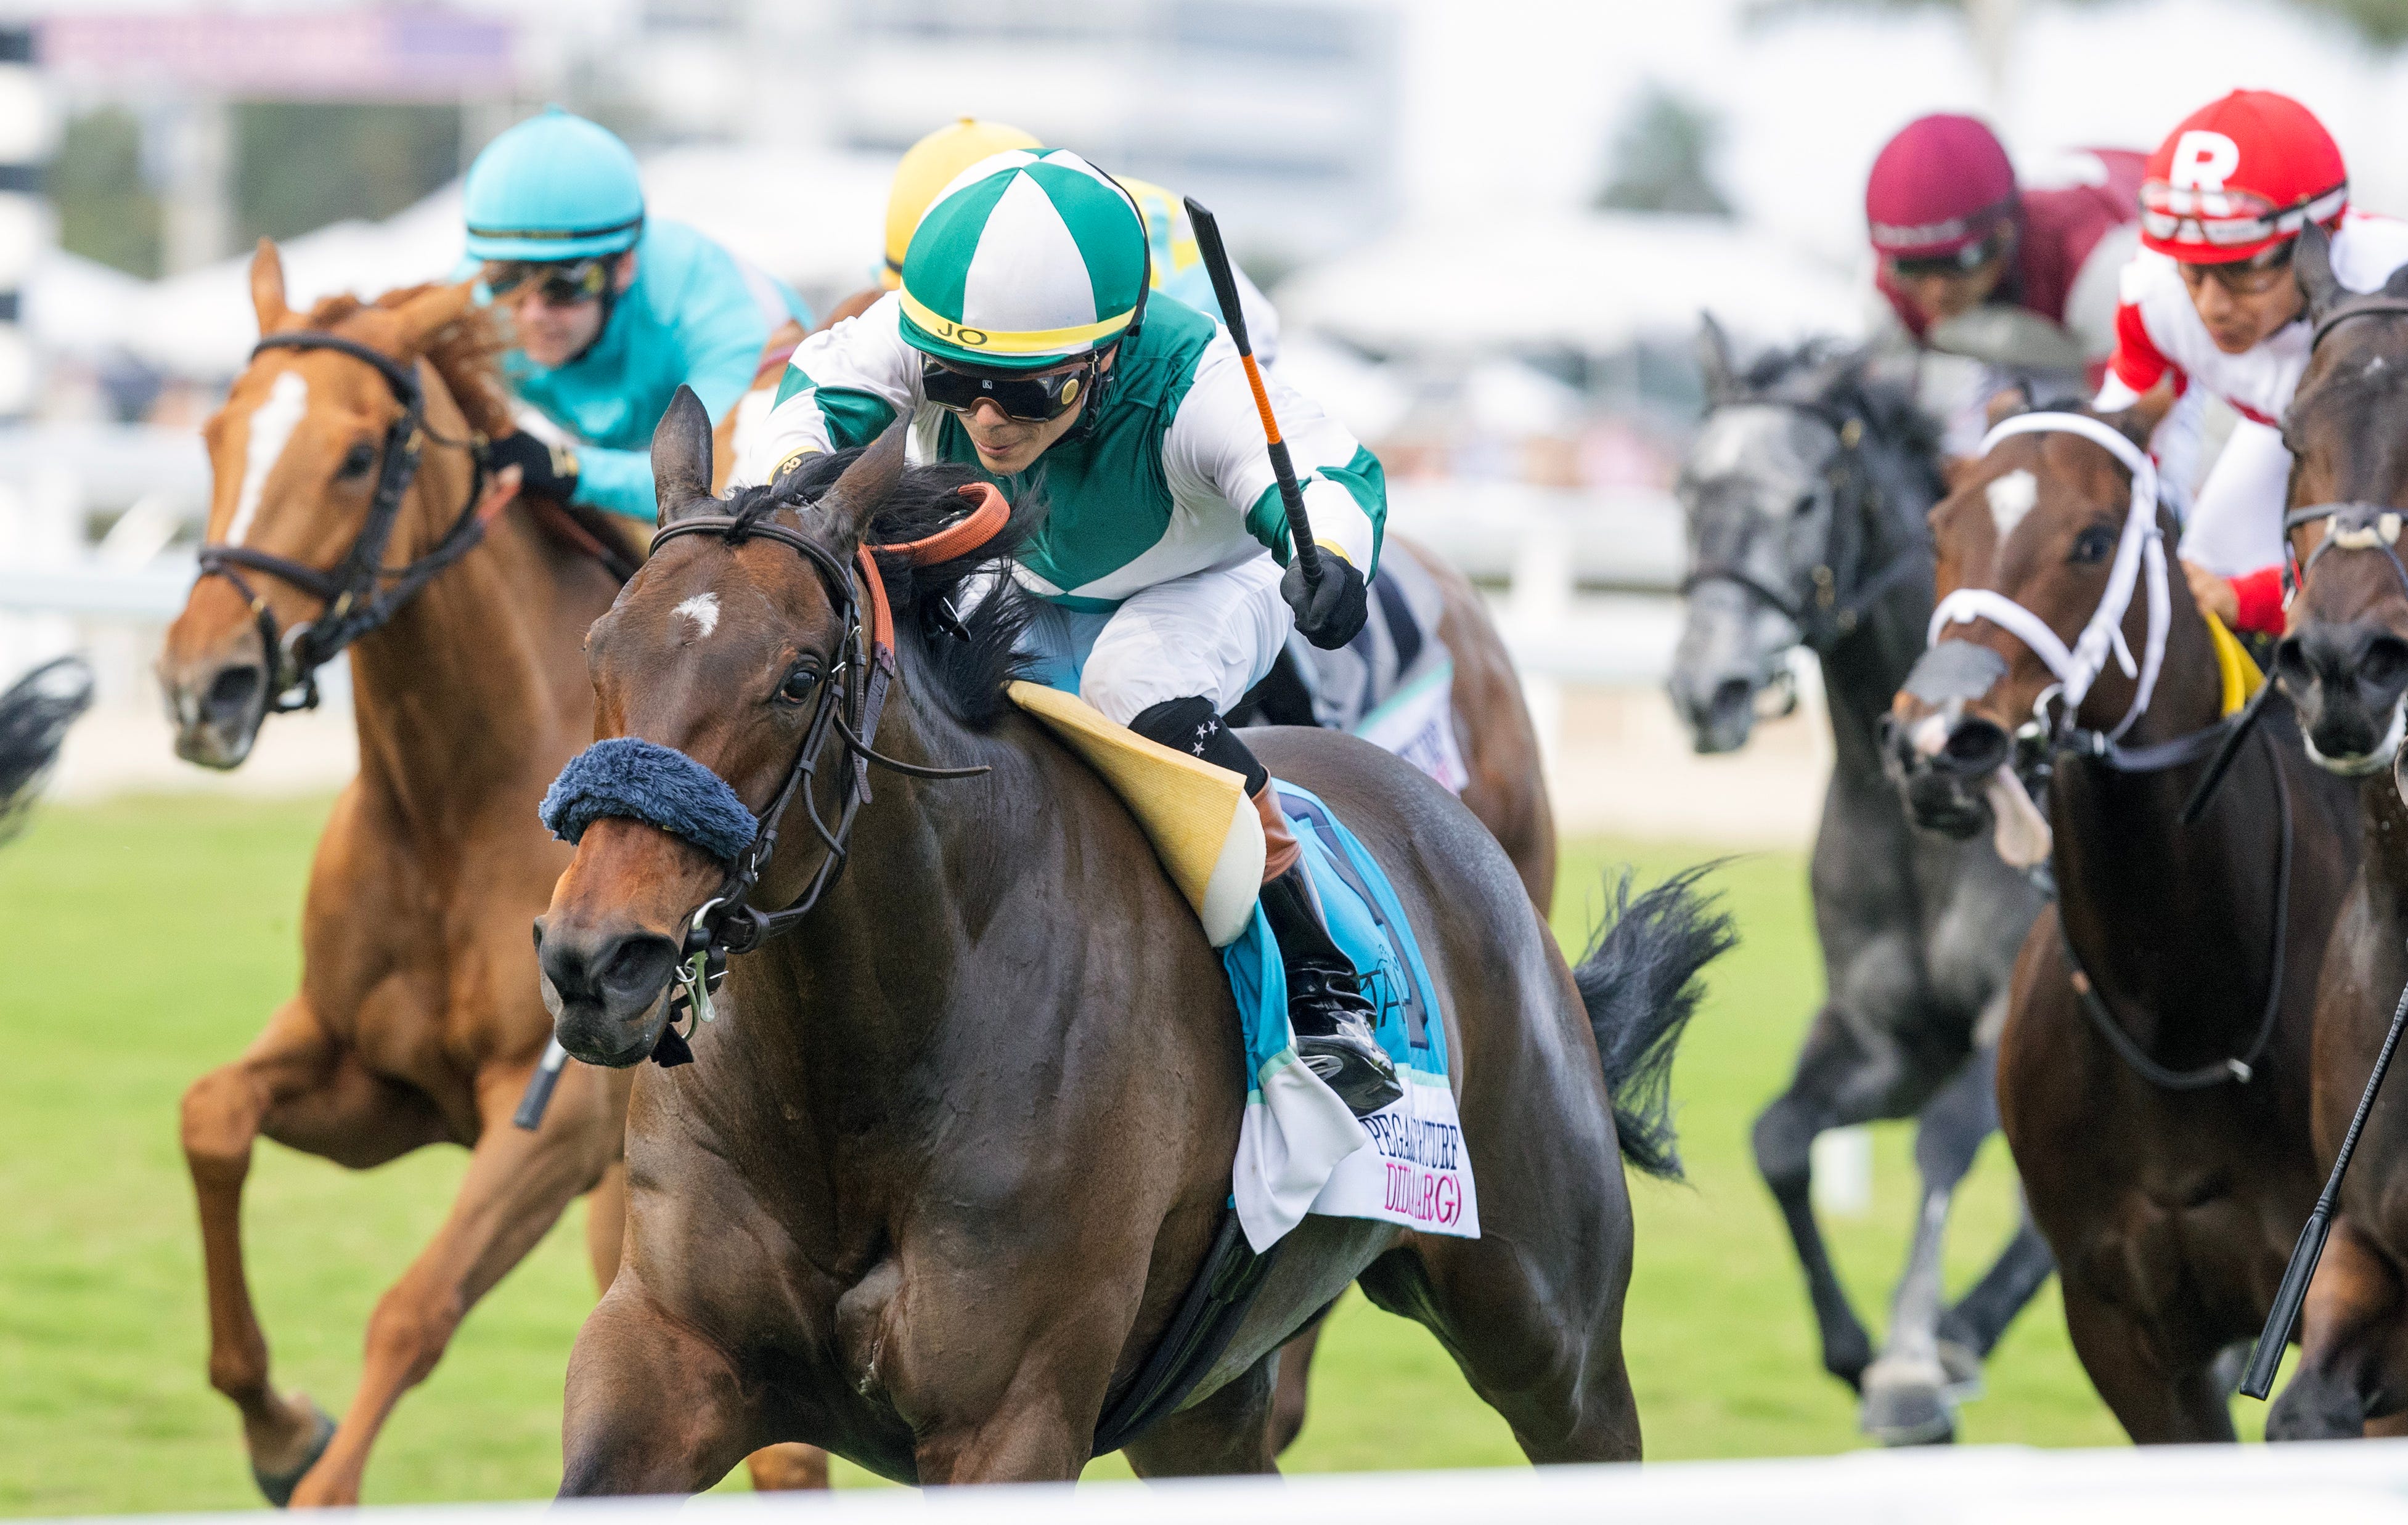 Didia outlasts rivals in Pegasus World Cup Filly and Mare Turf